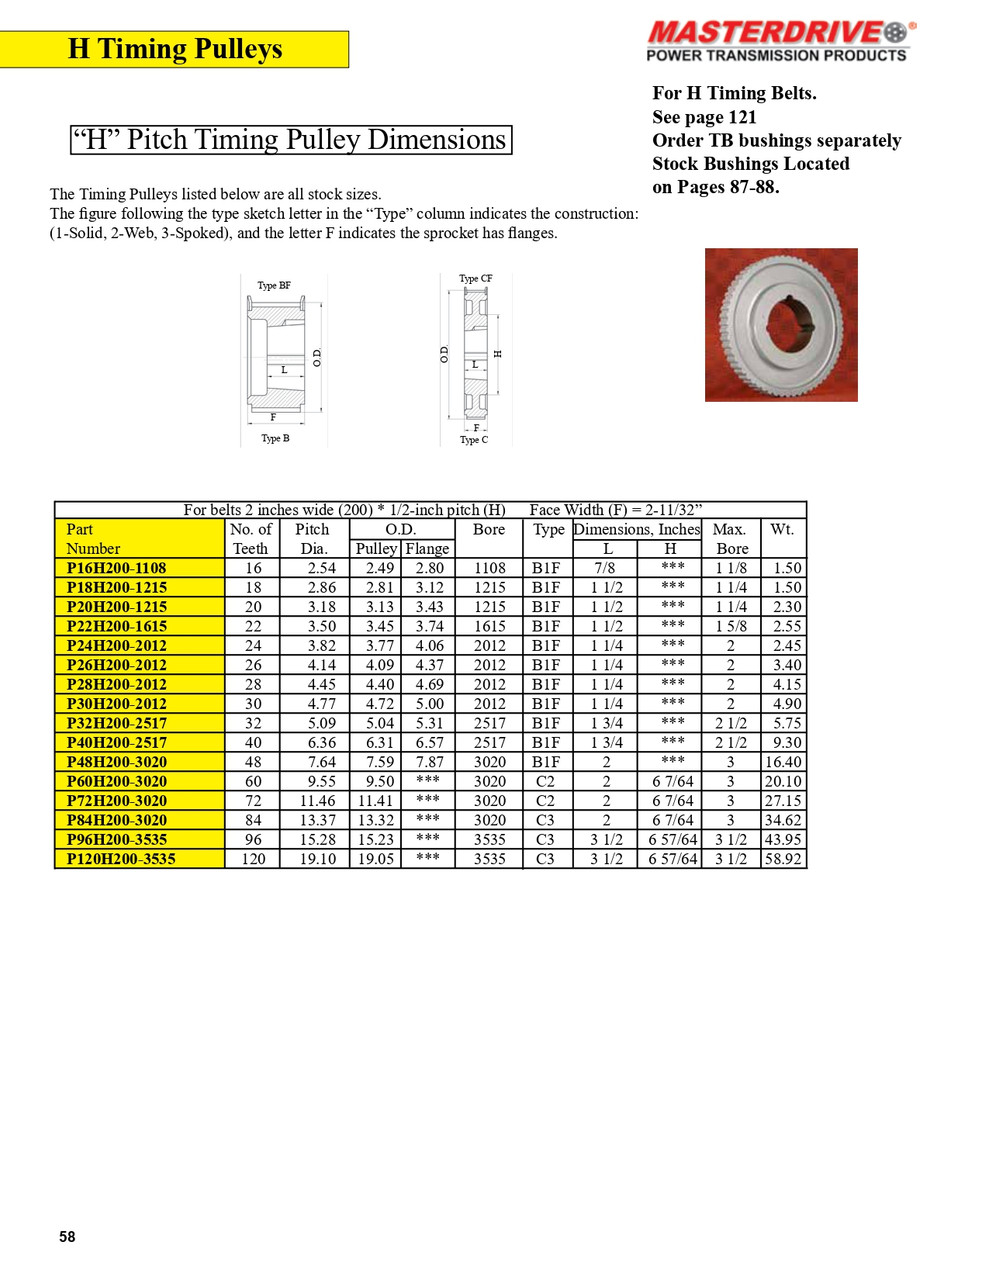 26 Tooth "H" Pitch "TB" Timing Pulley  P26H200-2012